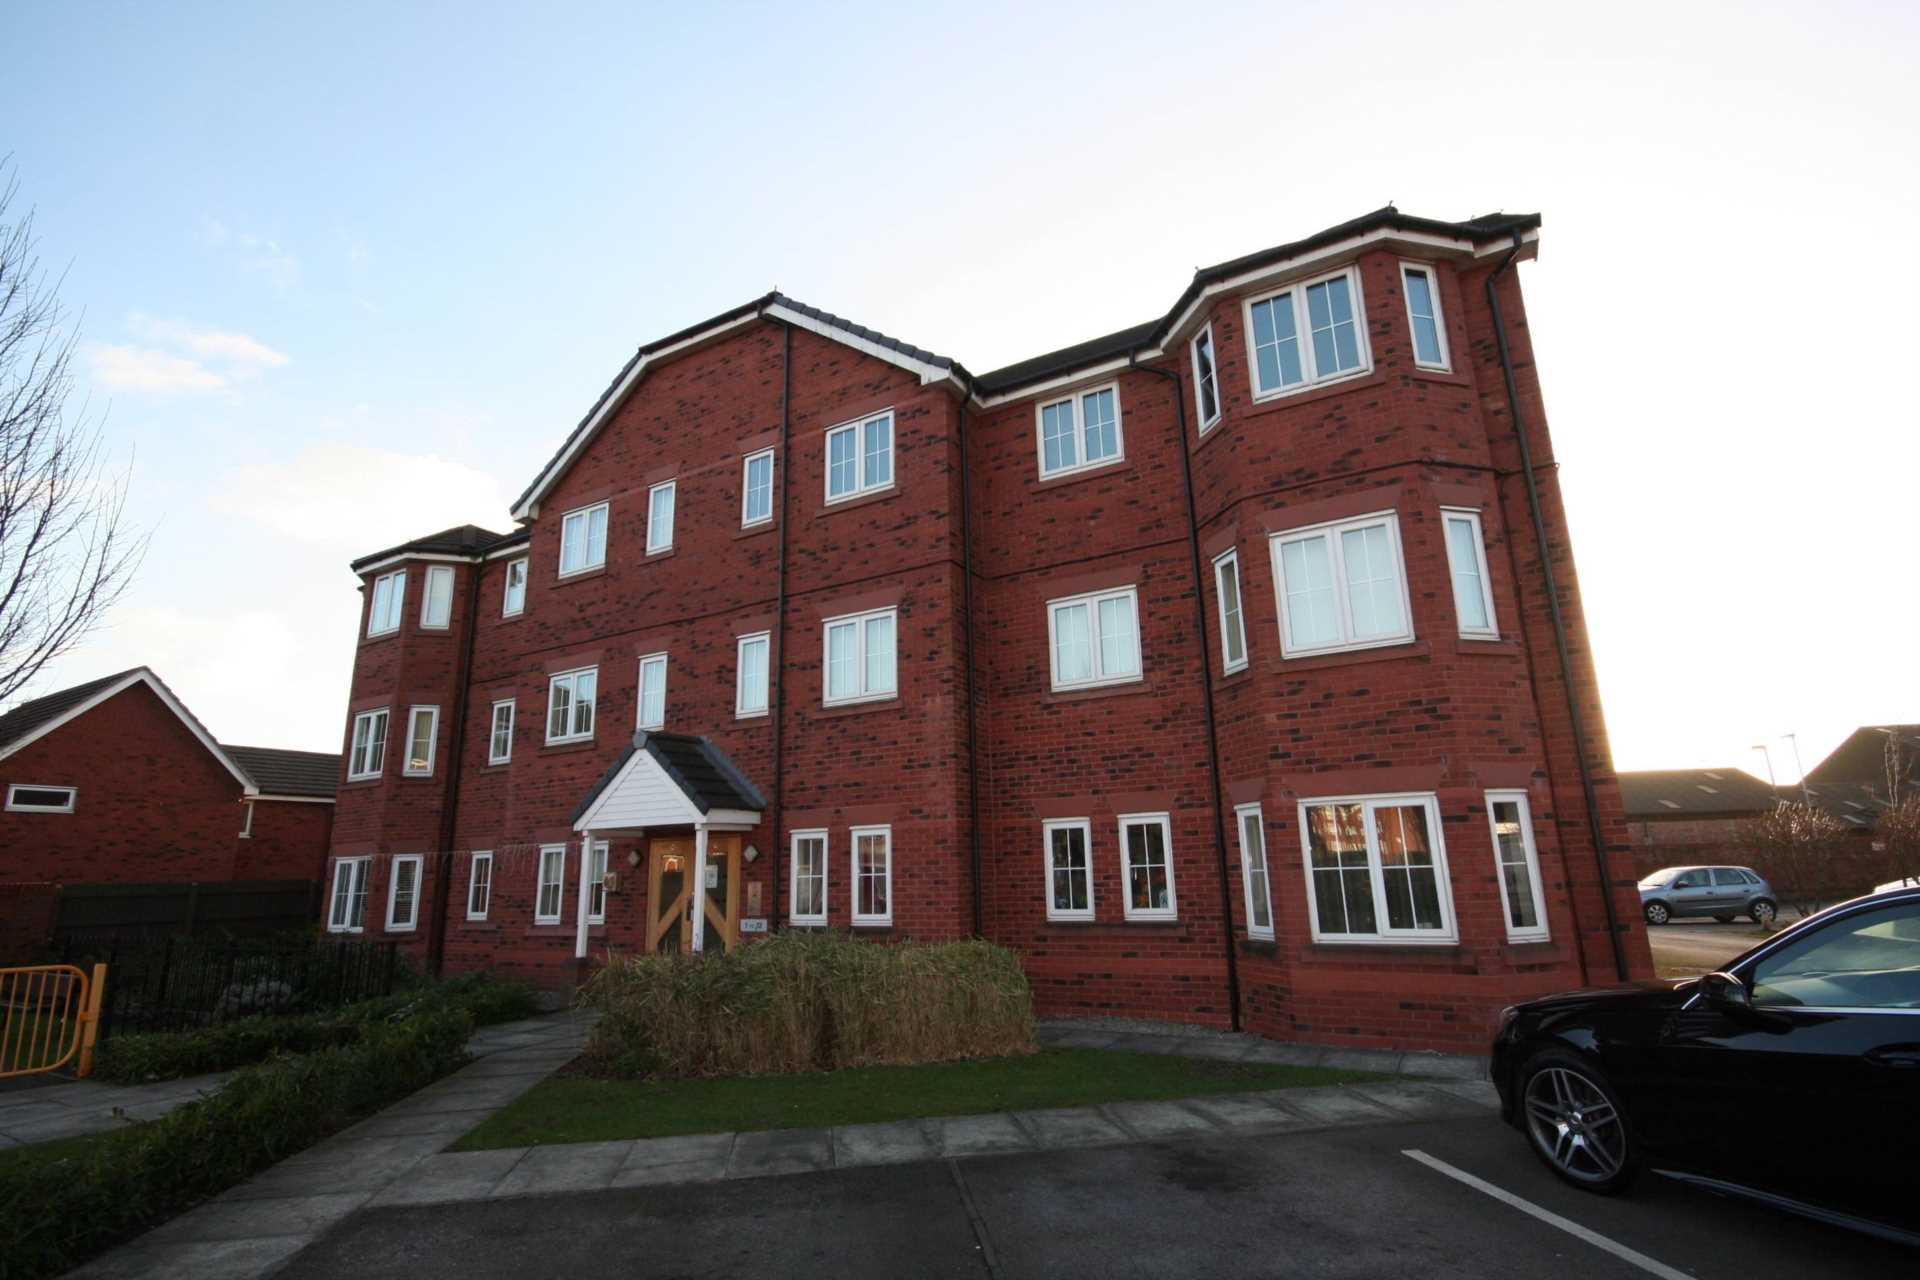 2 bed Apartment for rent in Warrington. From HLGB - Warrington